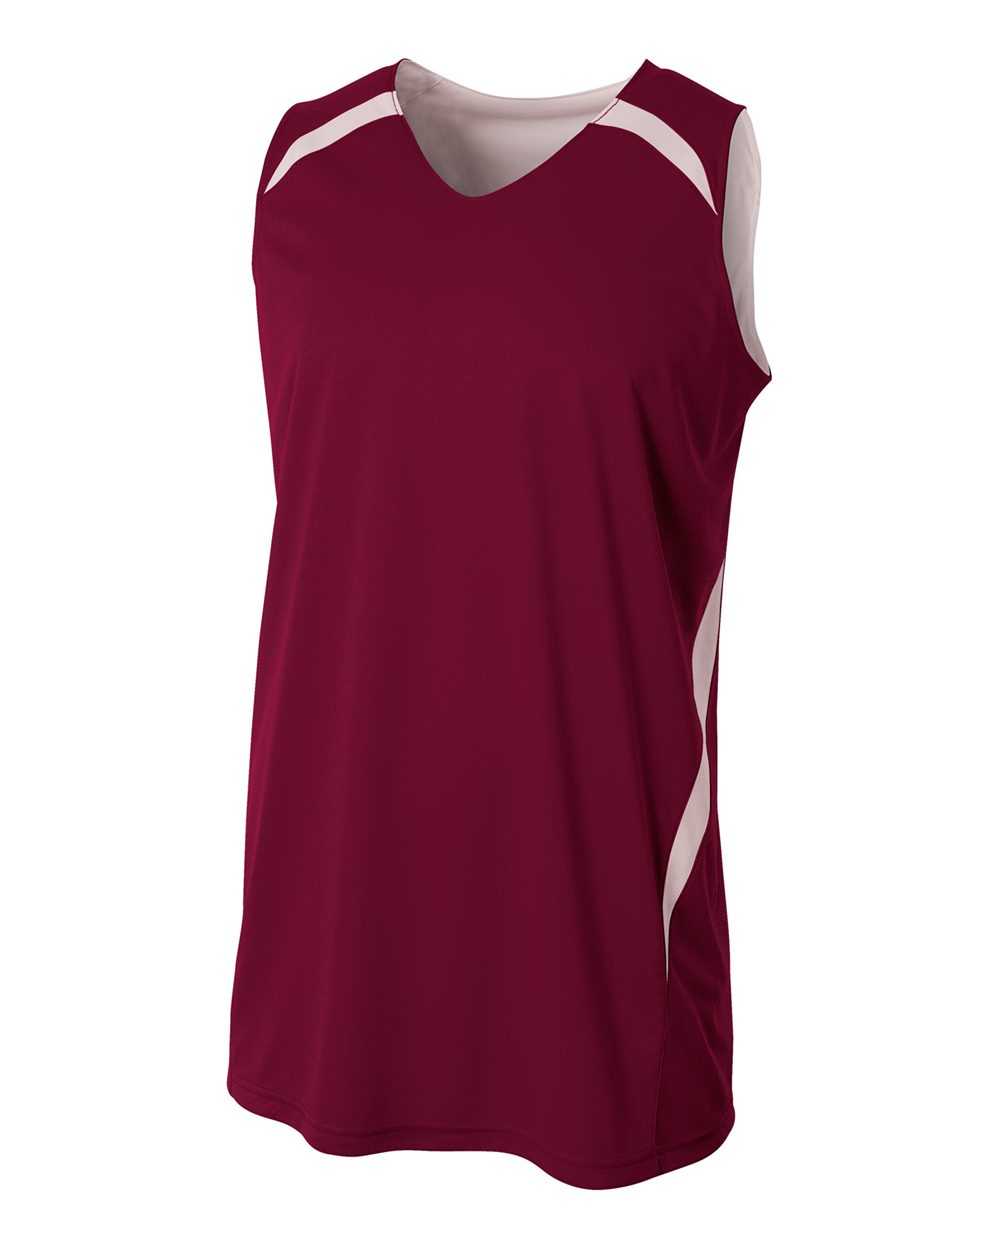 A4 N2372 Double Double Reversible Jersey - Maroon White - HIT a Double